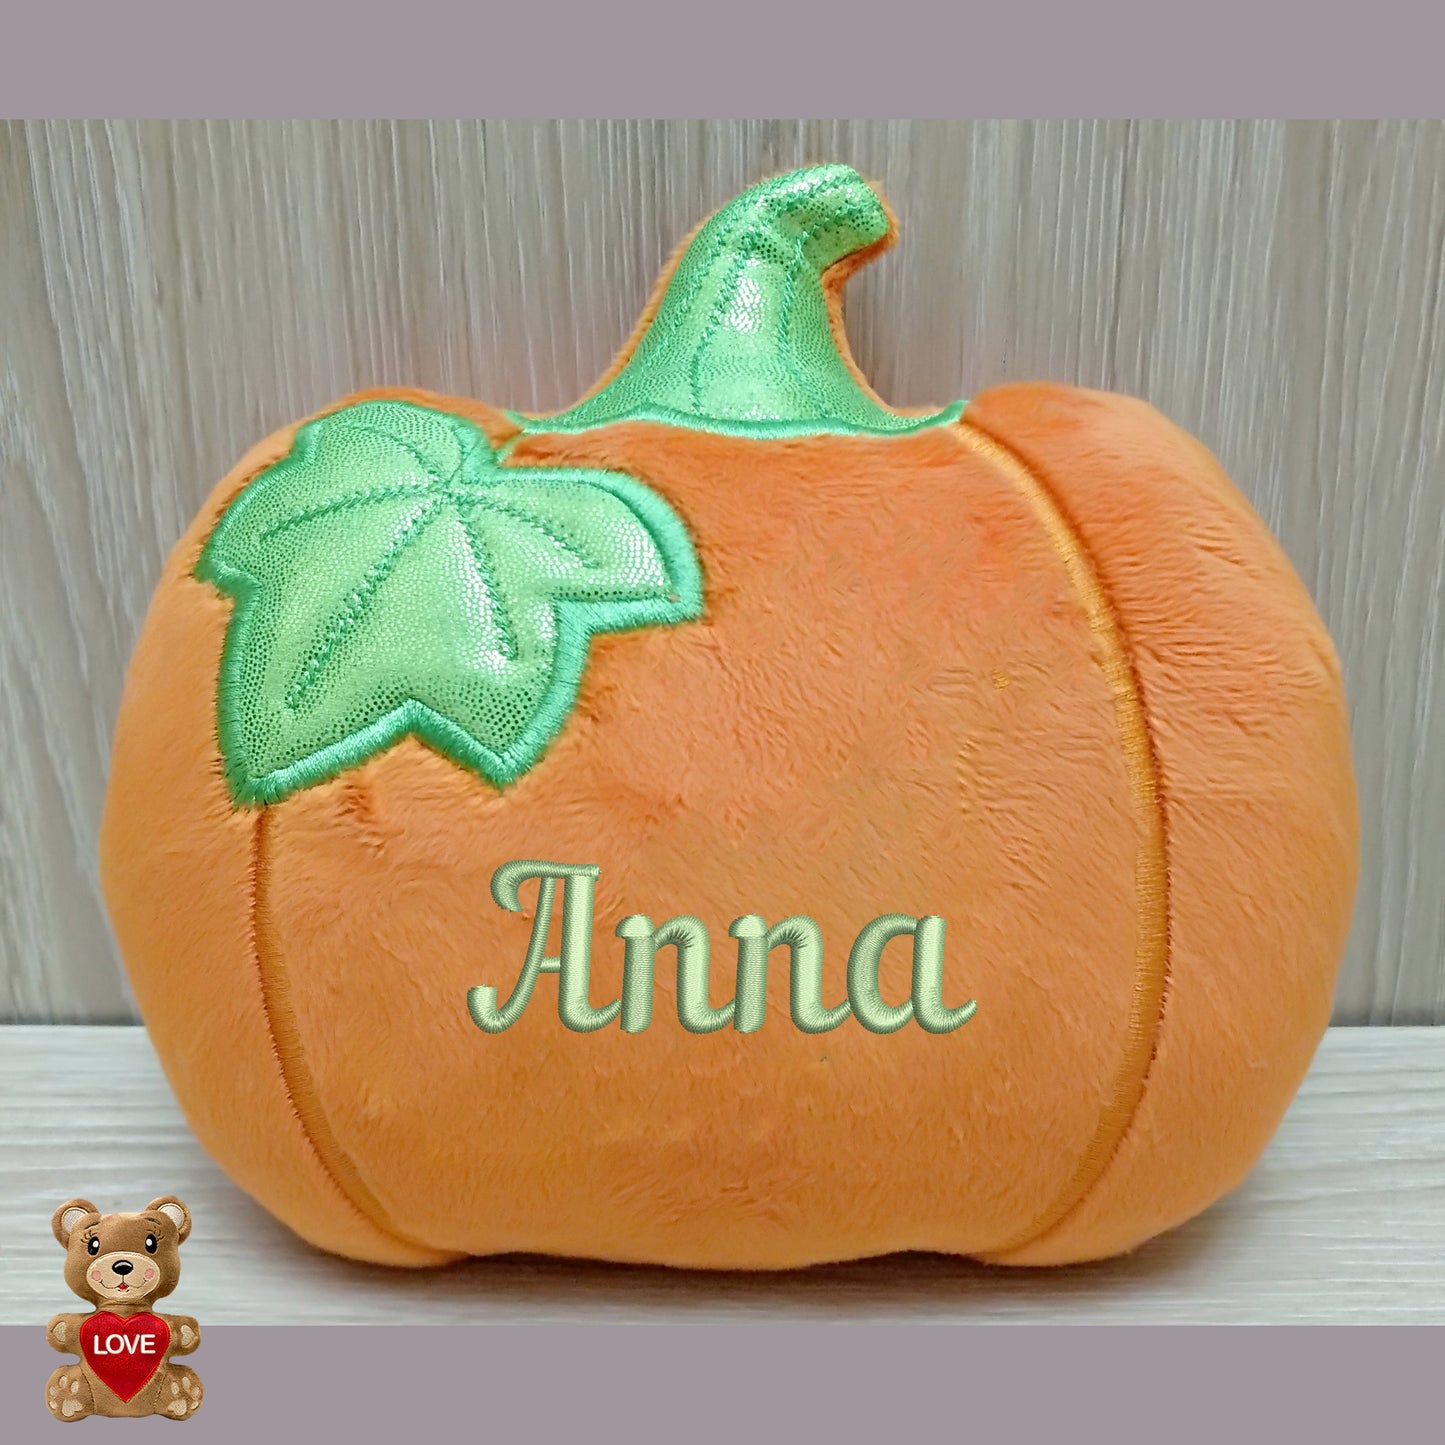 Personalised embroidery Plush Soft Toy Haloween Pumpkin ,Super cute personalised soft plush toy, Personalised Gift, Unique Personalized Birthday Gifts , Custom Gifts For Children